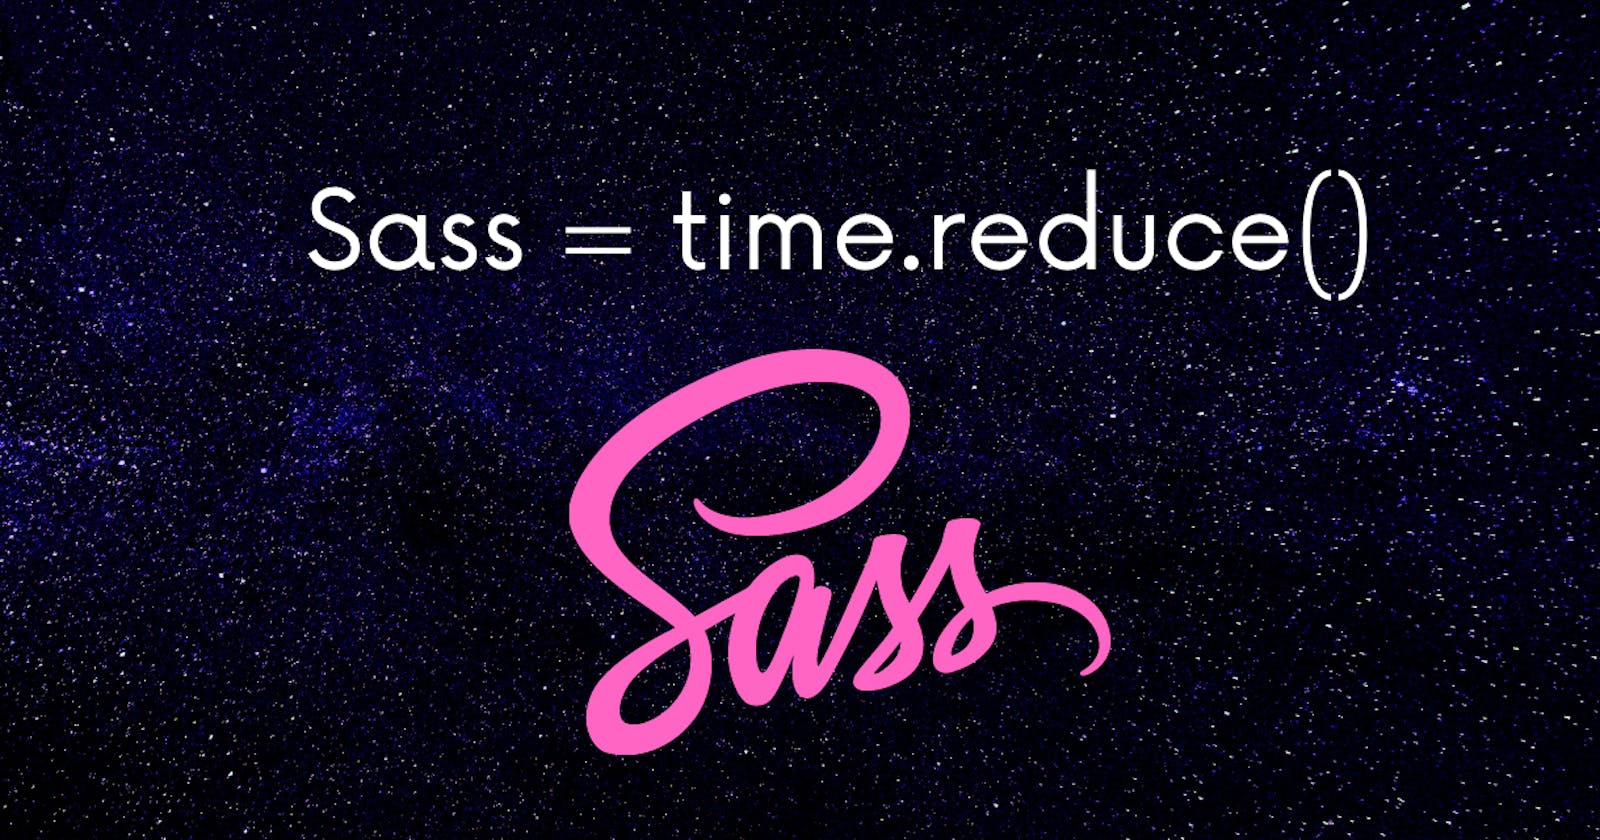 Getting Started with Sass 🚀